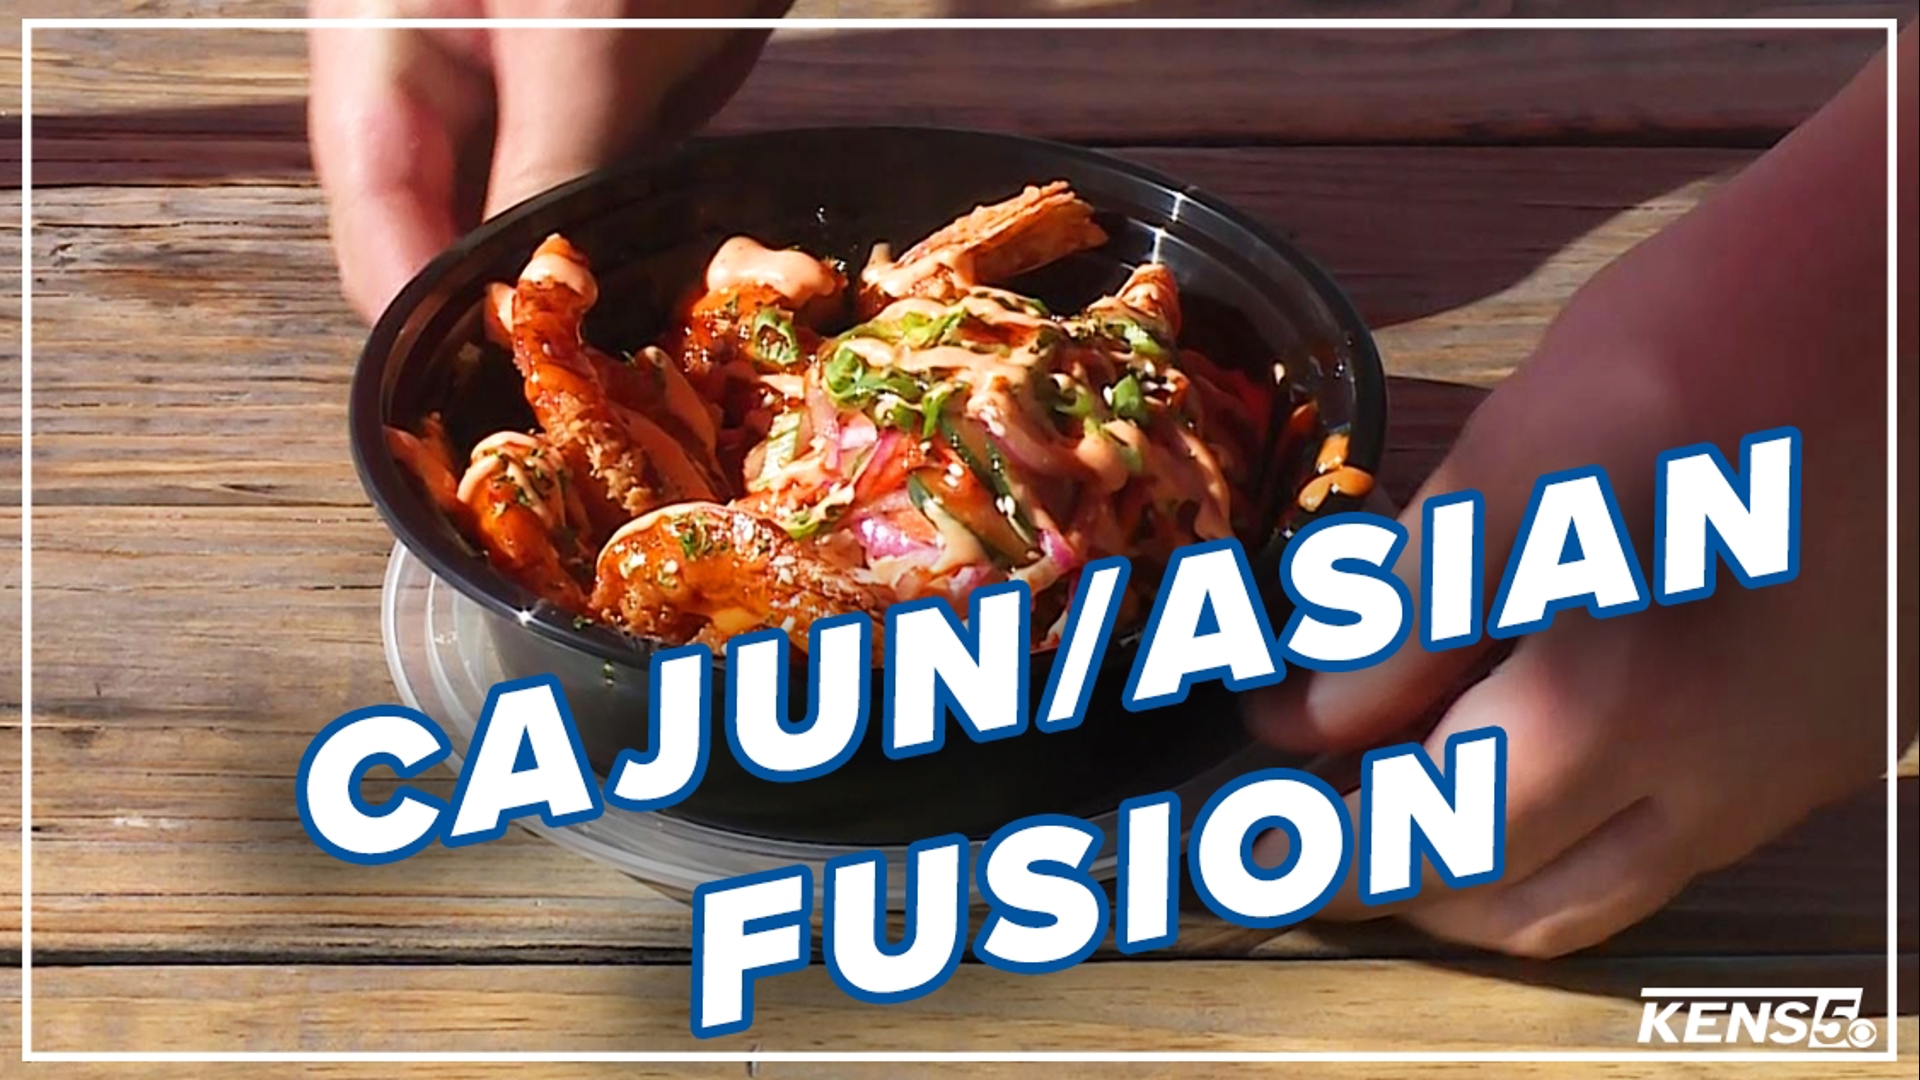 Owner Marcel Brady promises his Cajun and Asian fusion cuisine will taste as good as it looks!